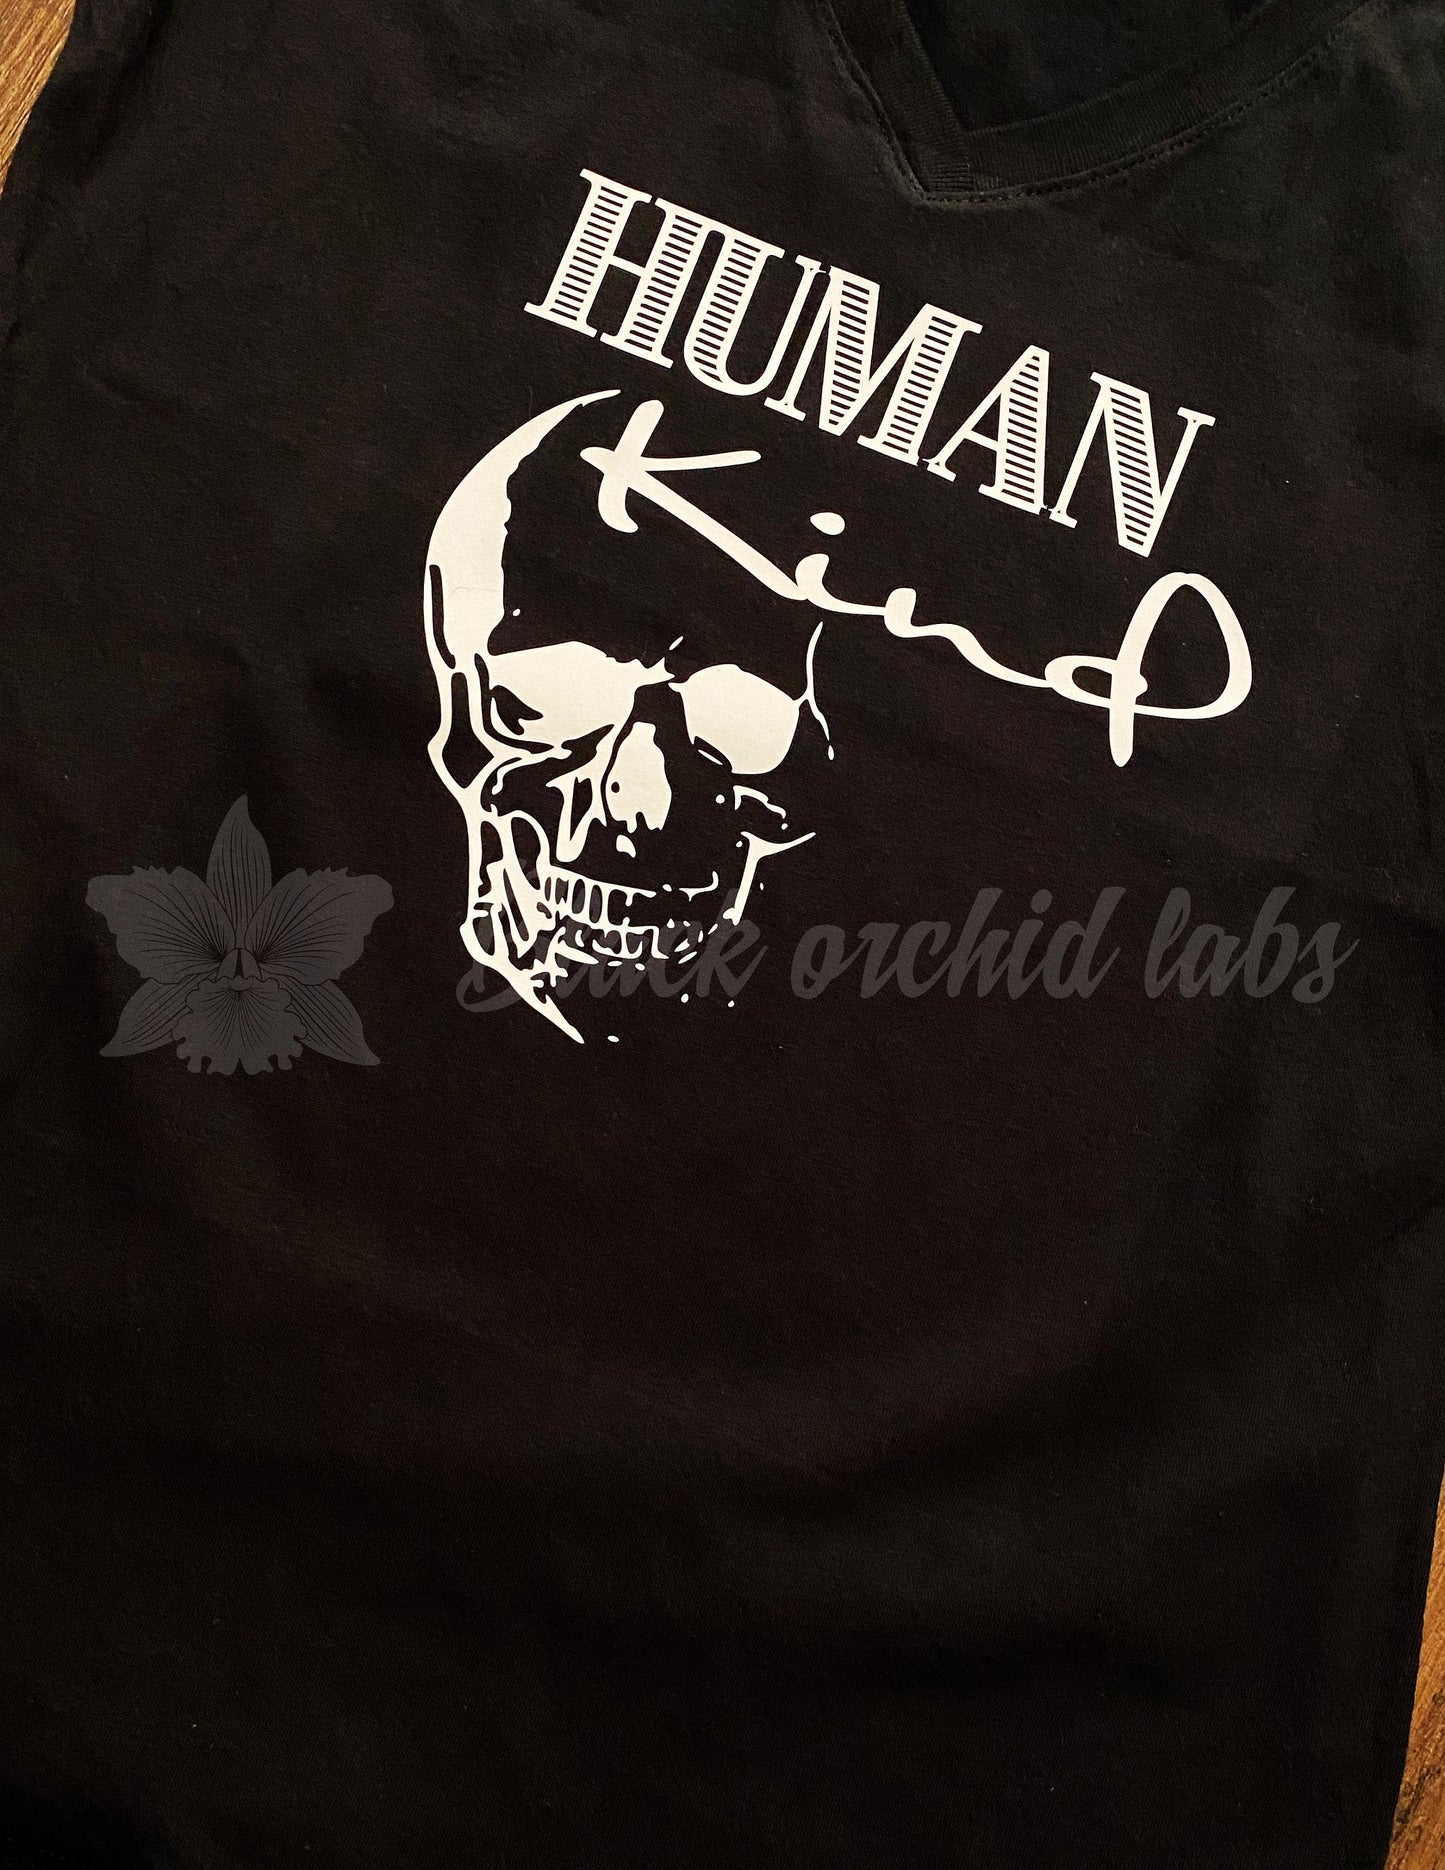 Humankind Hoodie, T-shirt, Tank, or Tote, Humanity Hoodie, Kindness Shirt, Positive Messages, Skull Shirt